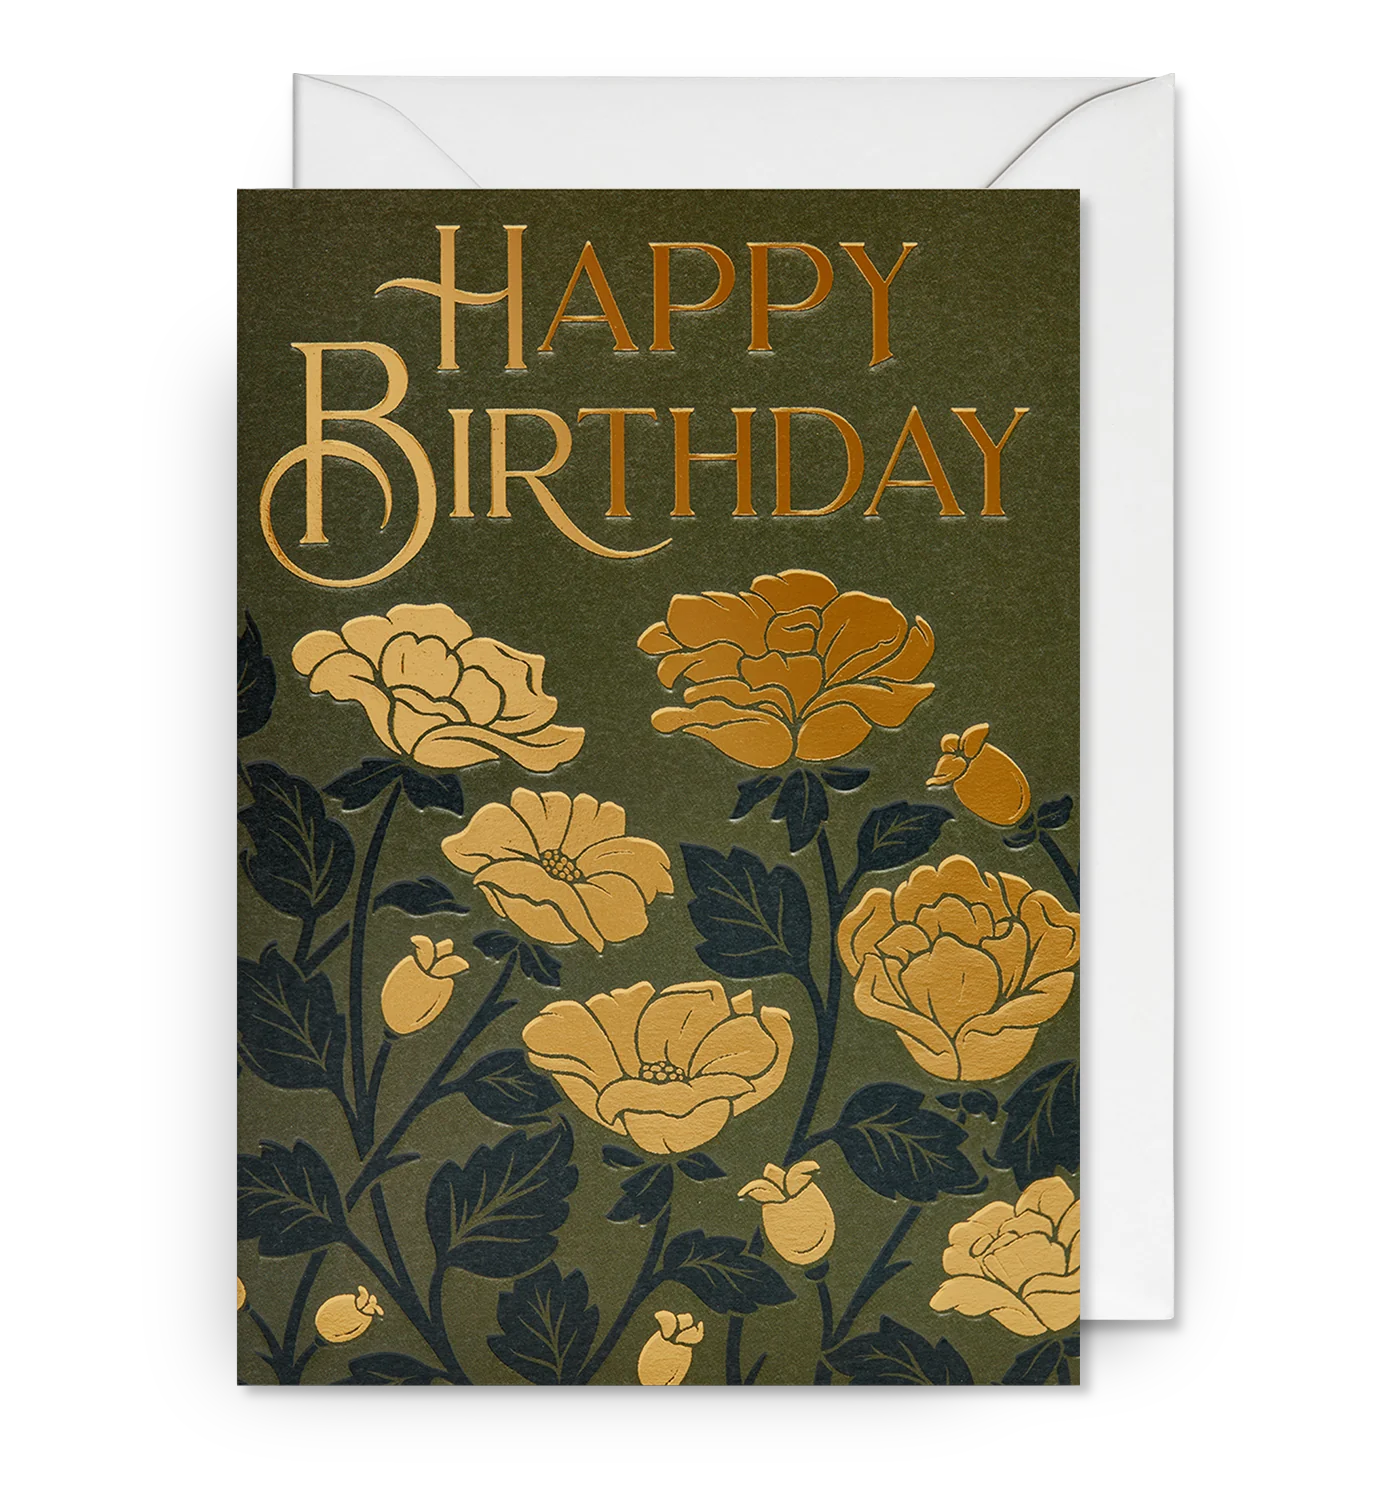 Decorative Flowers Gold Foiled Birthday Card by Tobias Saul